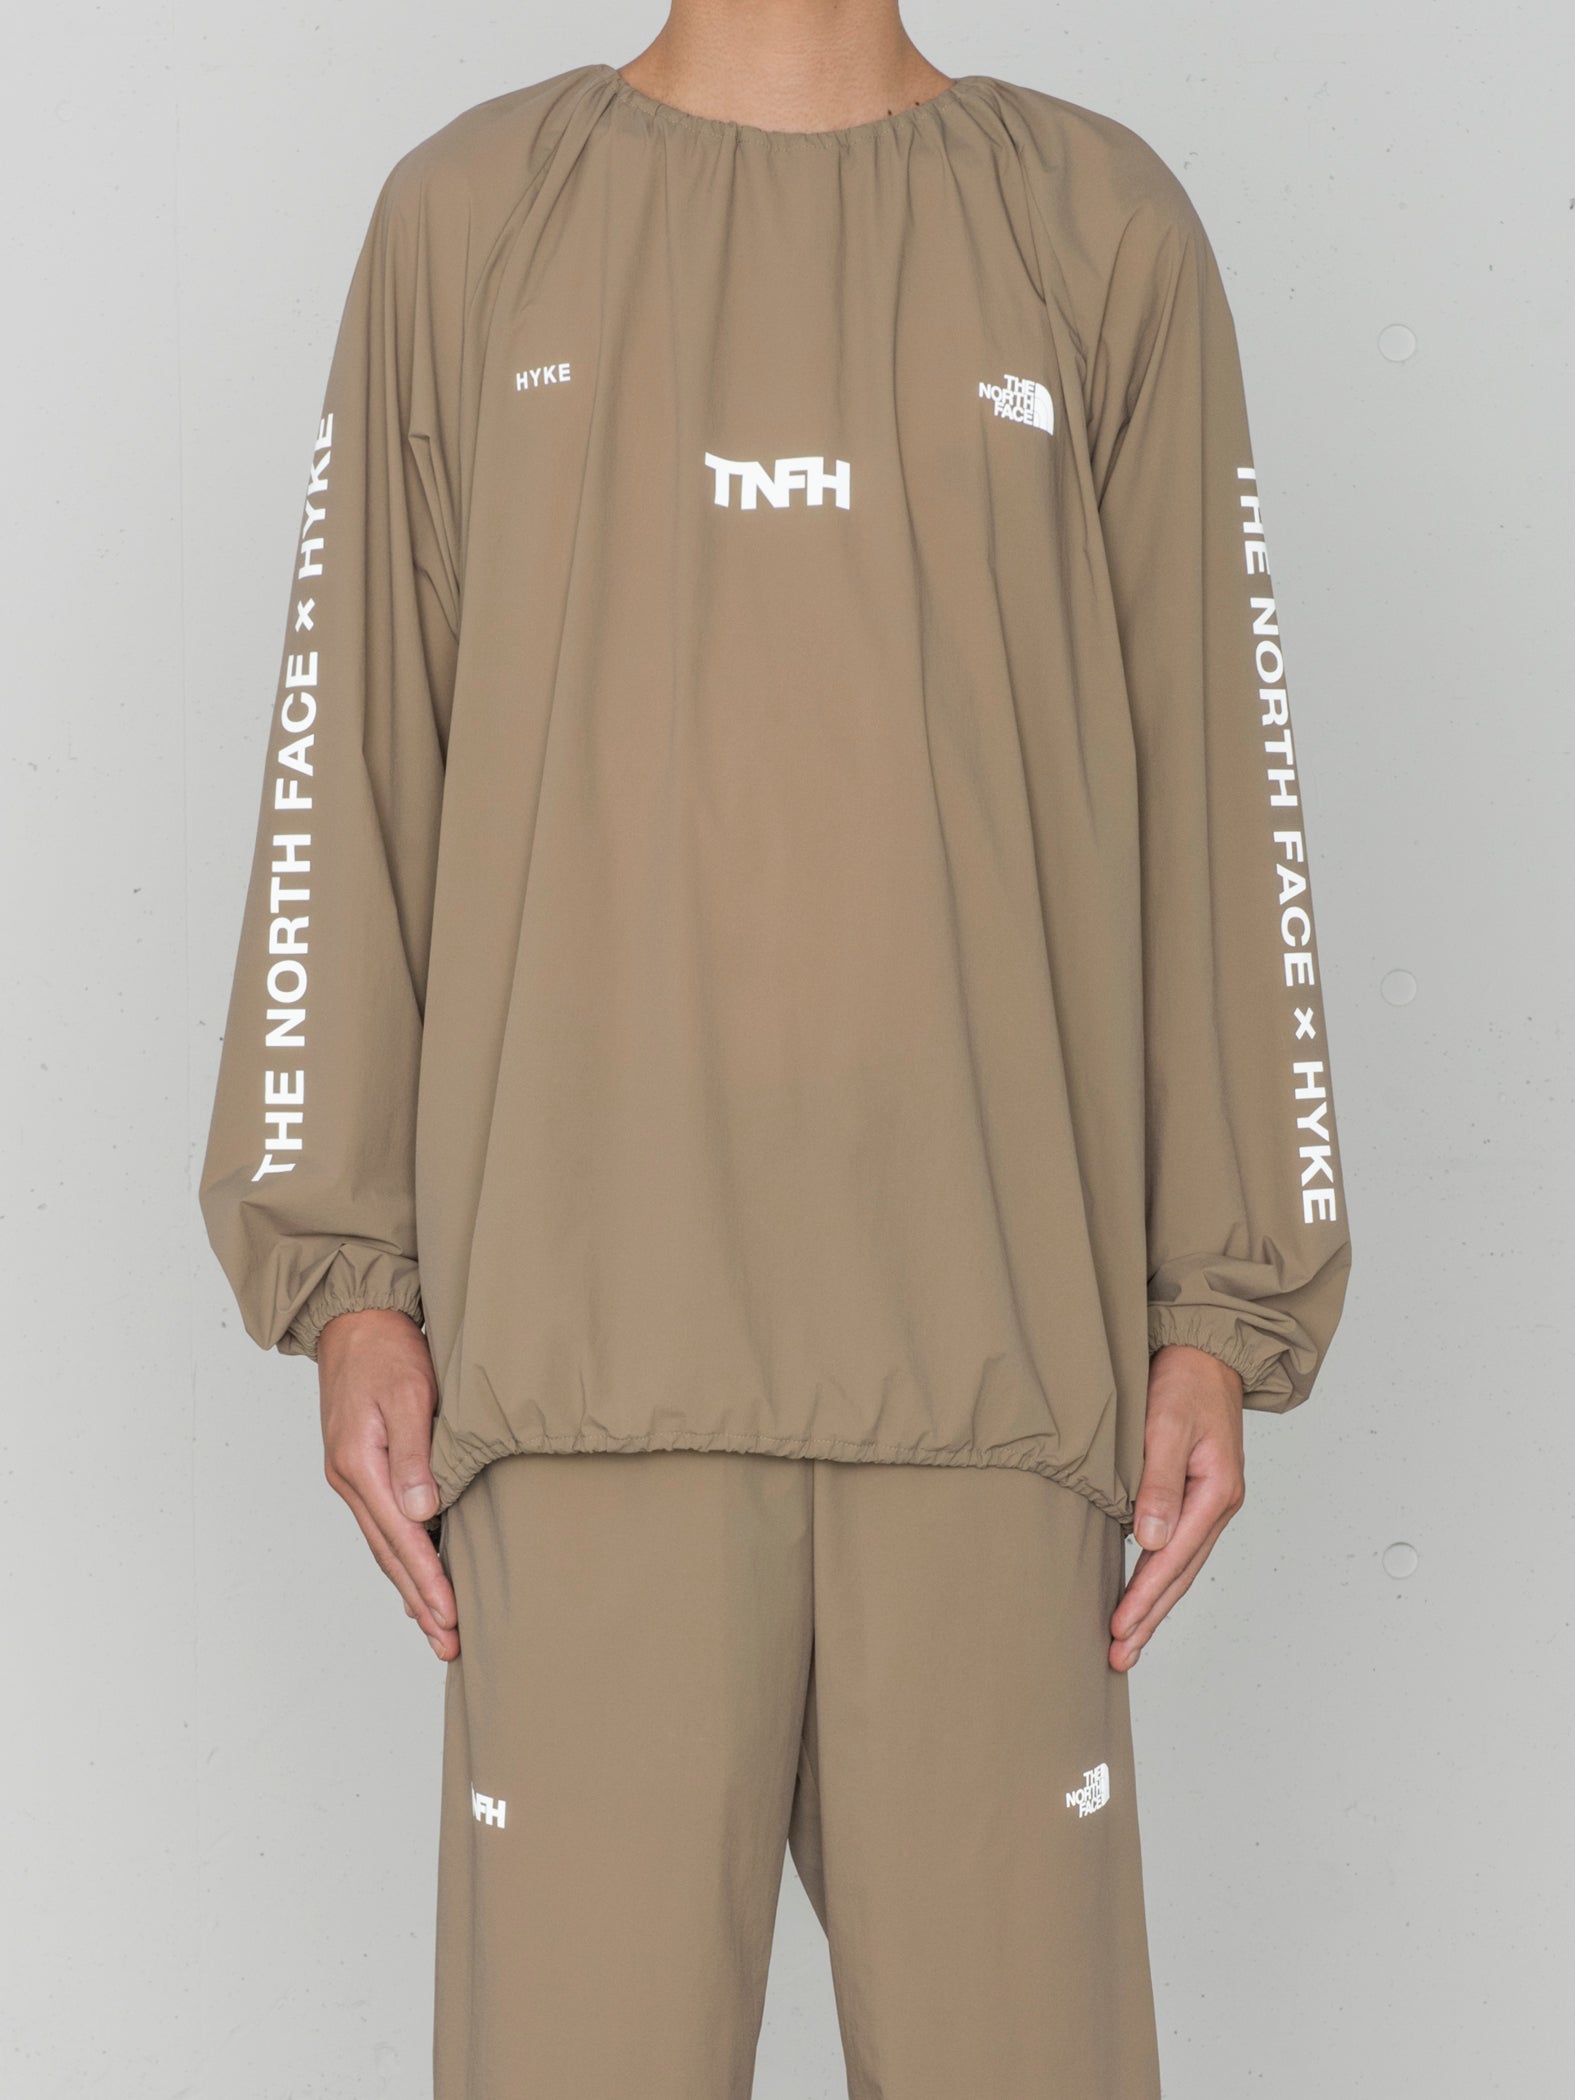 Trail Wind Crew (Mens)TNFH THE NORTH FACE × HYKE – HYKE ONLINE STORE